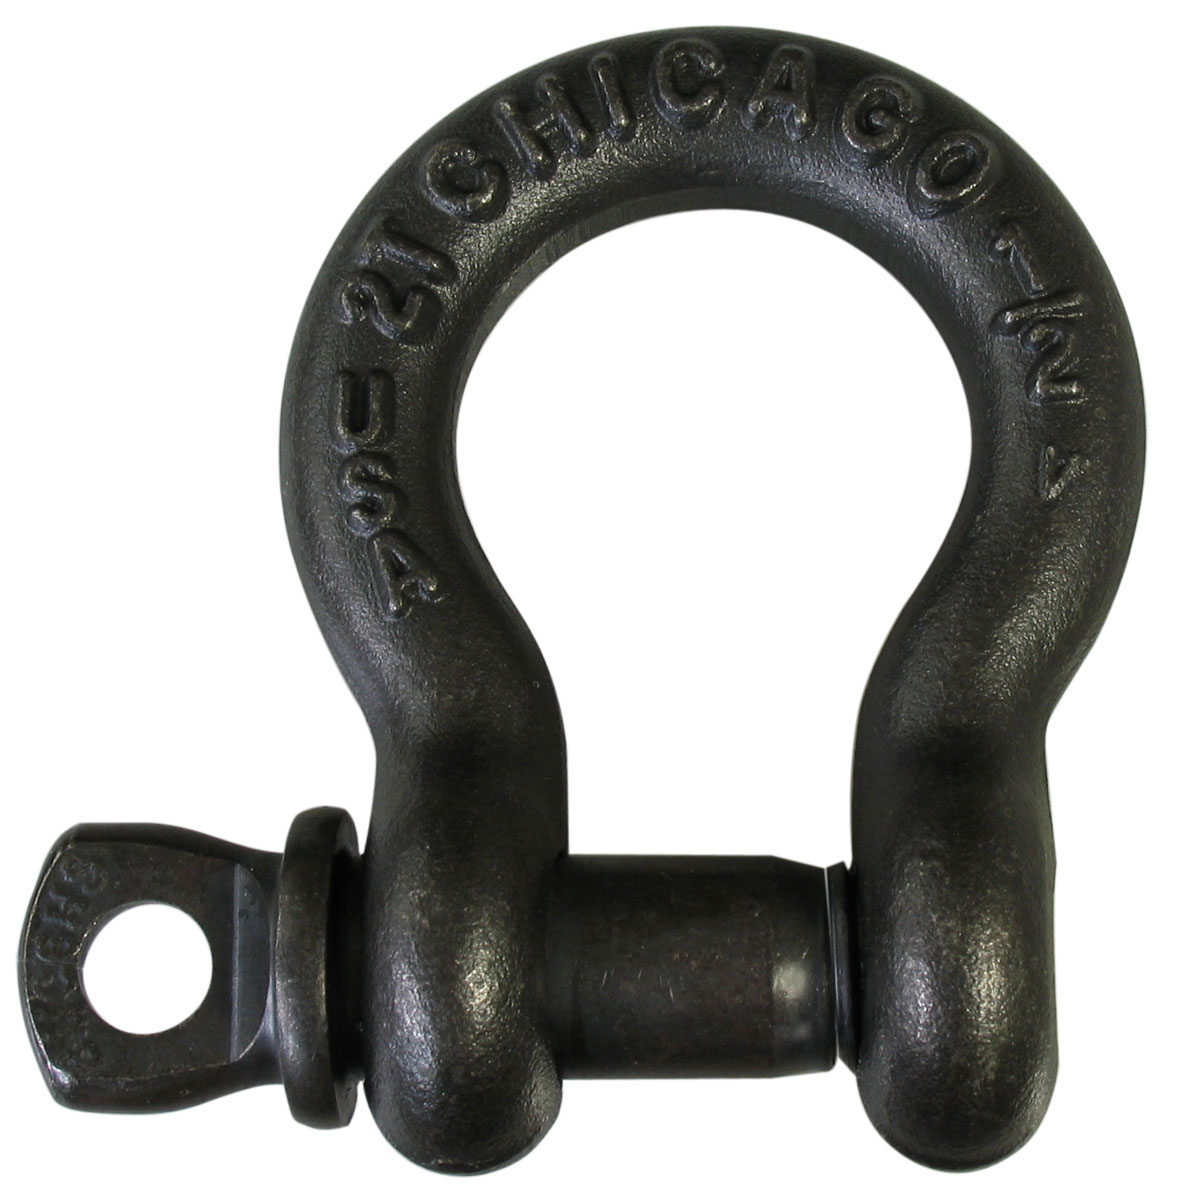 Chicago Hardware Black Theatrical Screw Pin Anchor Shackles